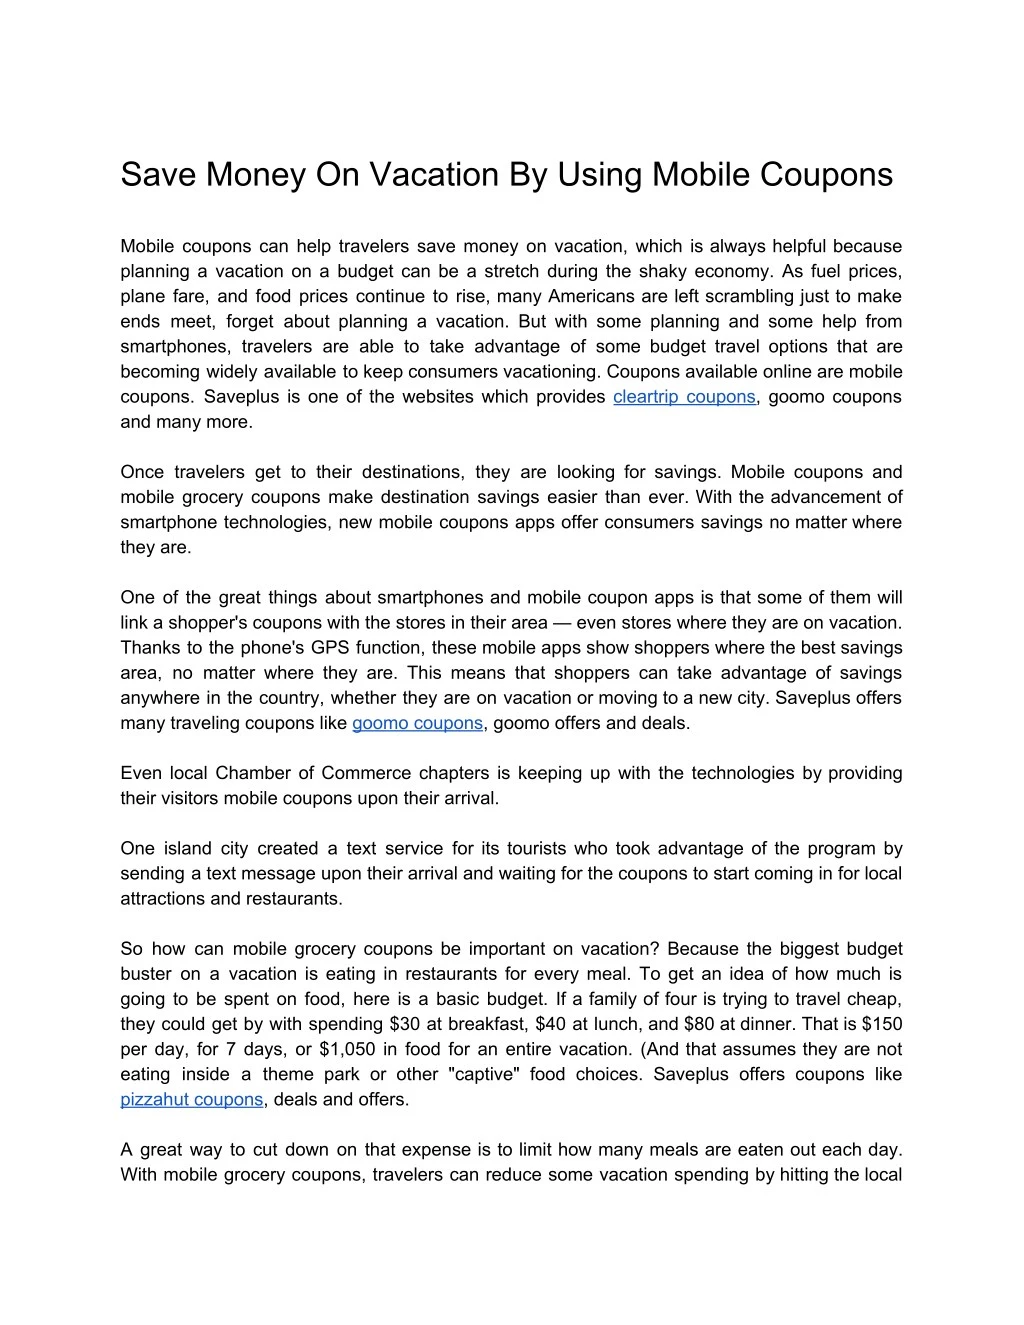 save money on vacation by using mobile coupons